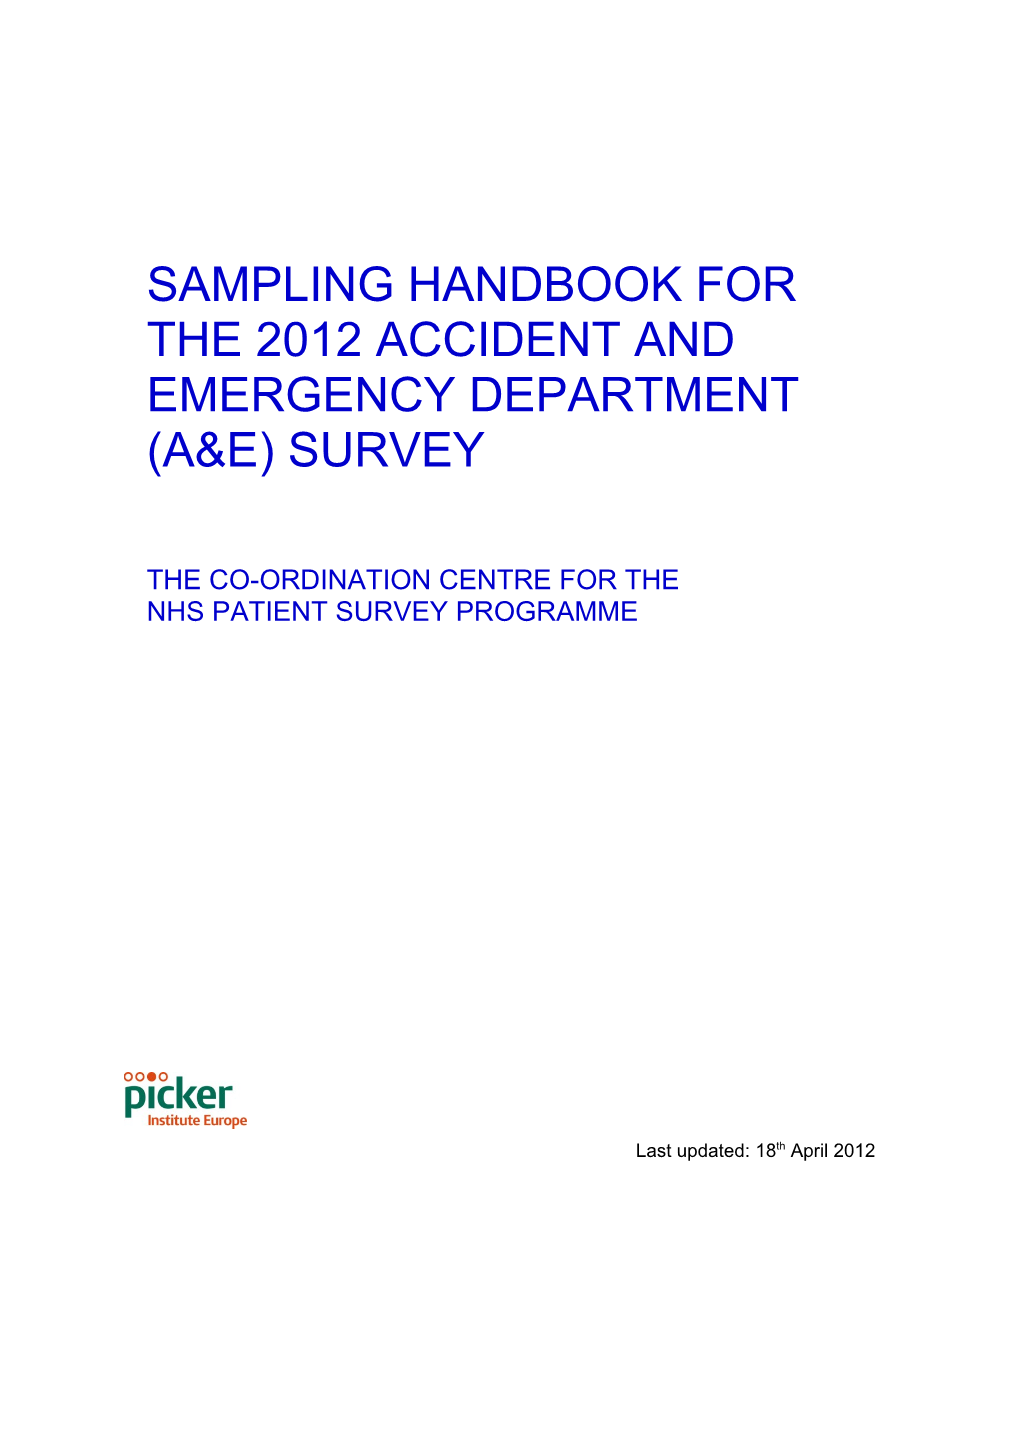 Sampling Handbookfor the 2012 Accident and Emergency Department (A&E) Survey